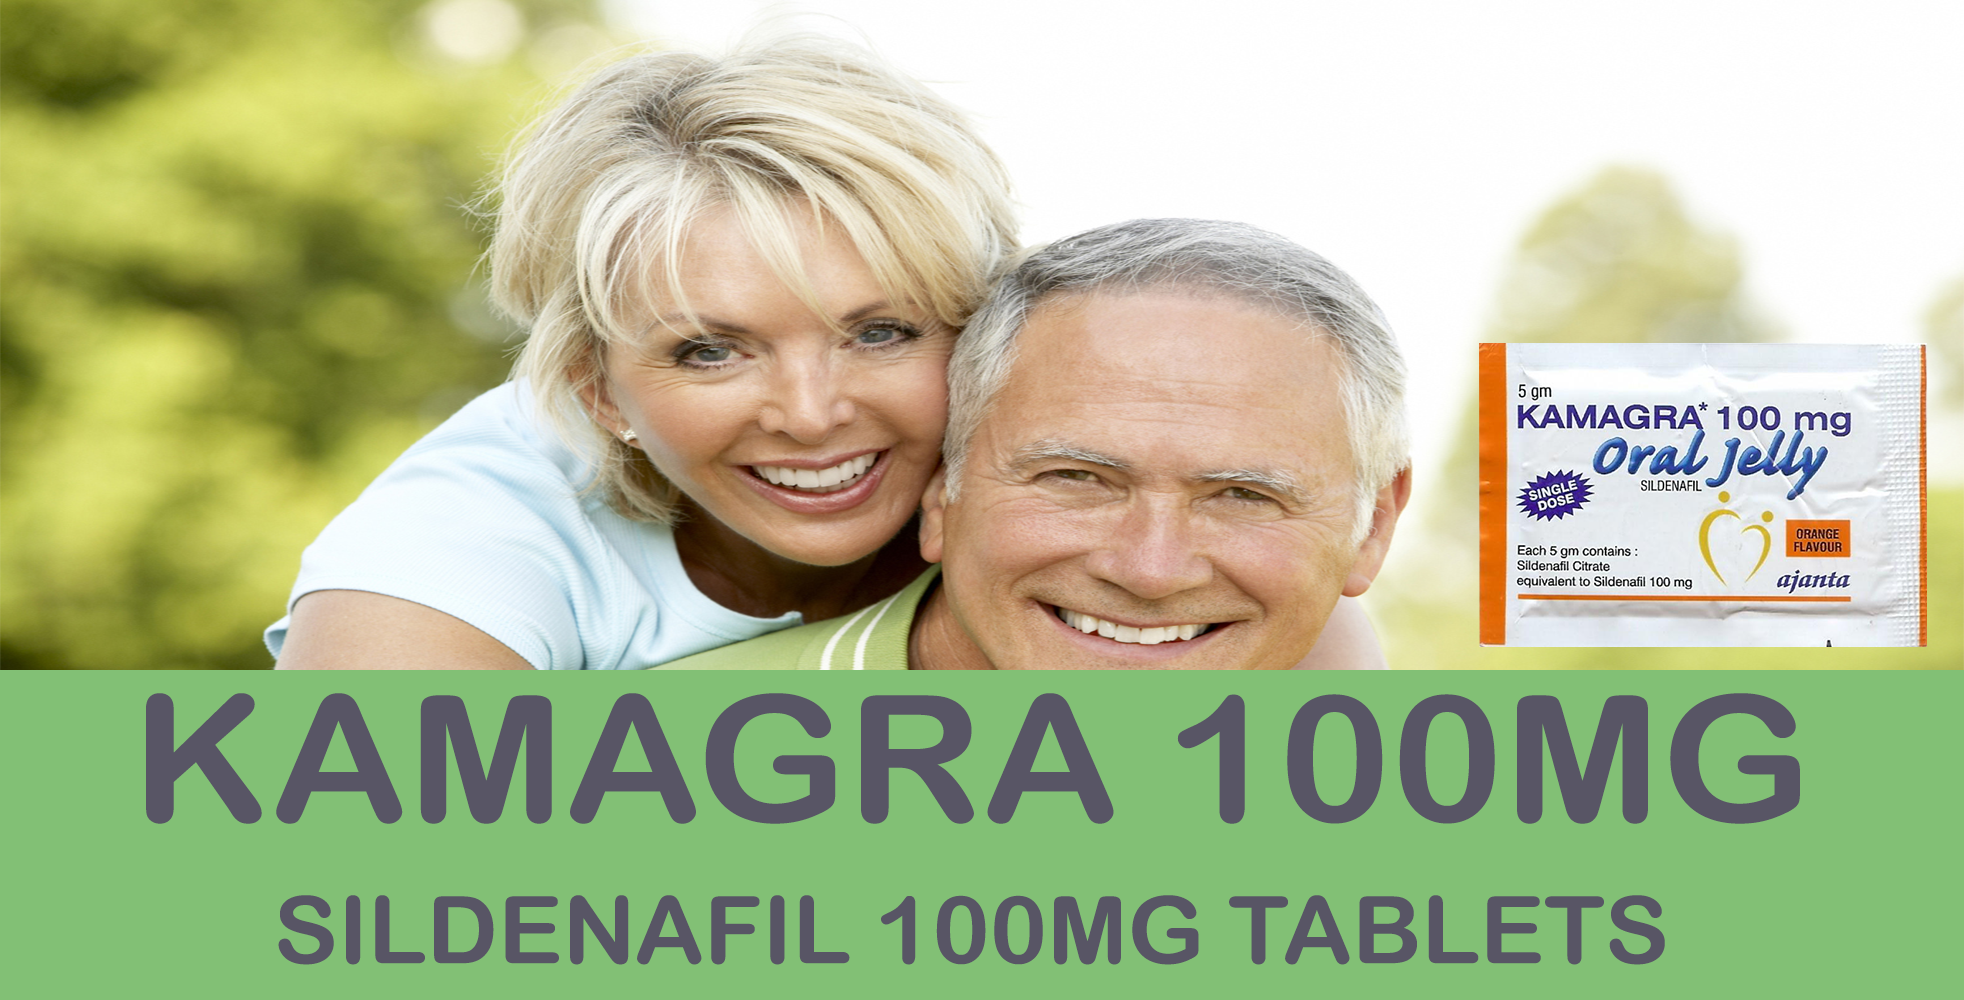 AMAZING BENEFITS OF KAMAGRA ONLINE FOR MEN TO GET A STRONG ERECTION